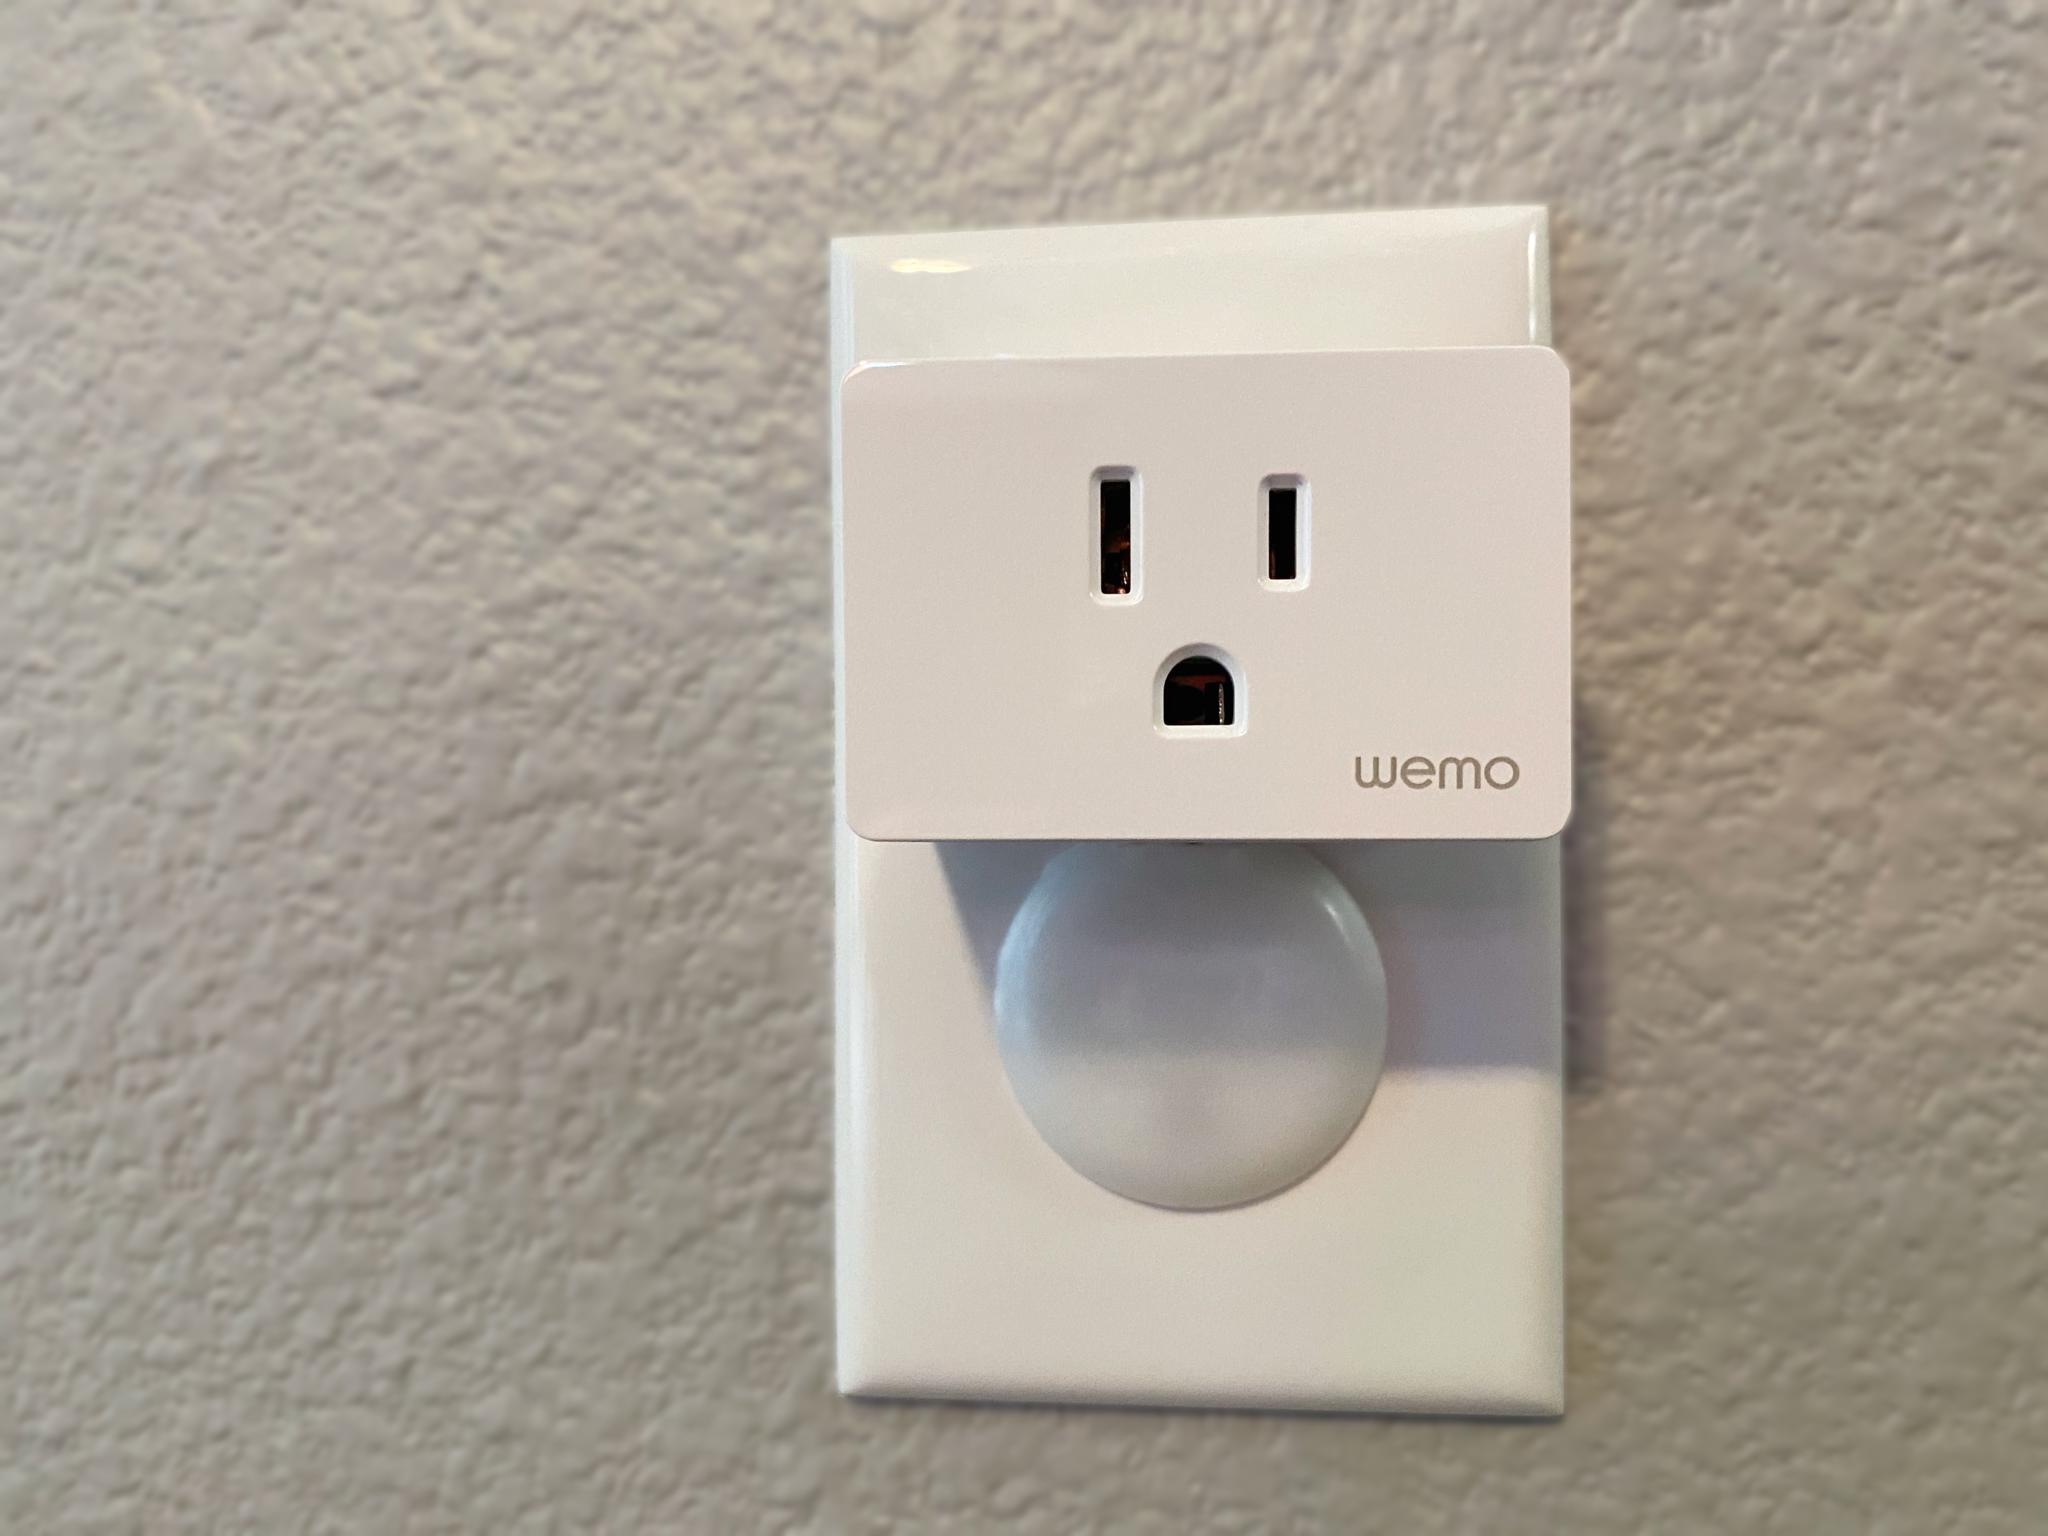 Wemo Wifi Smart Plug front view installed in a socket